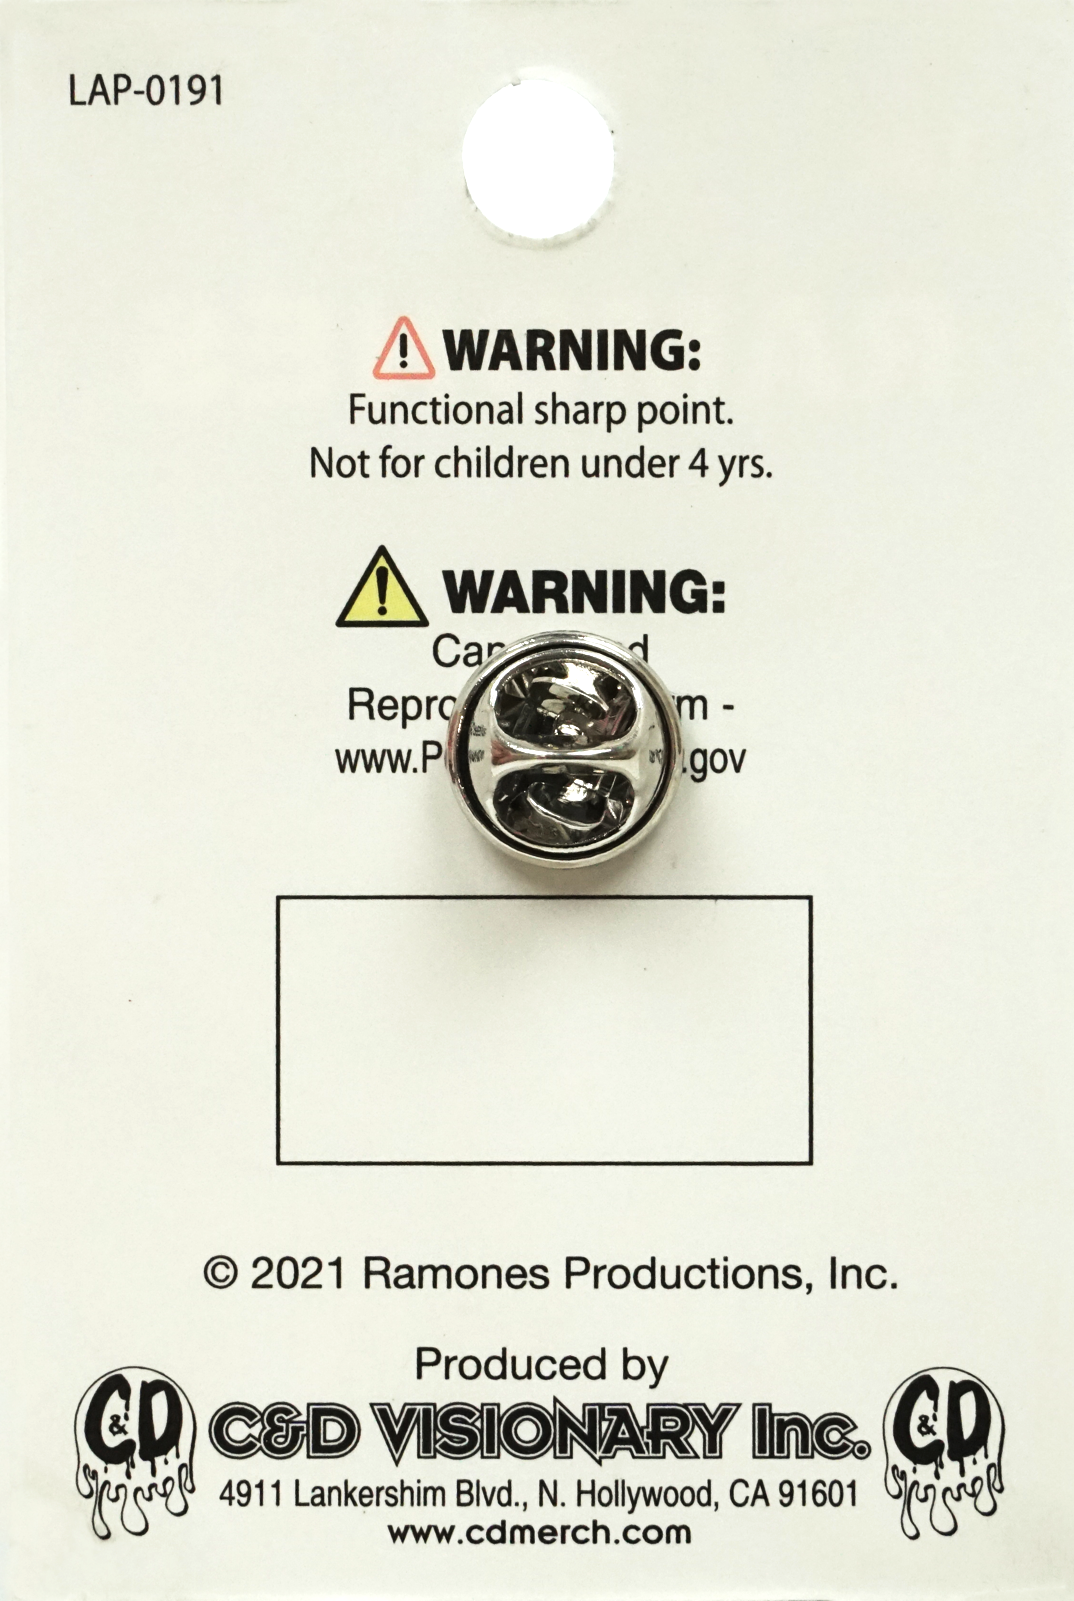 Square Deal Recordings & Supplies - Enamel Pin - The Ramones - Hey Ho Let's Go